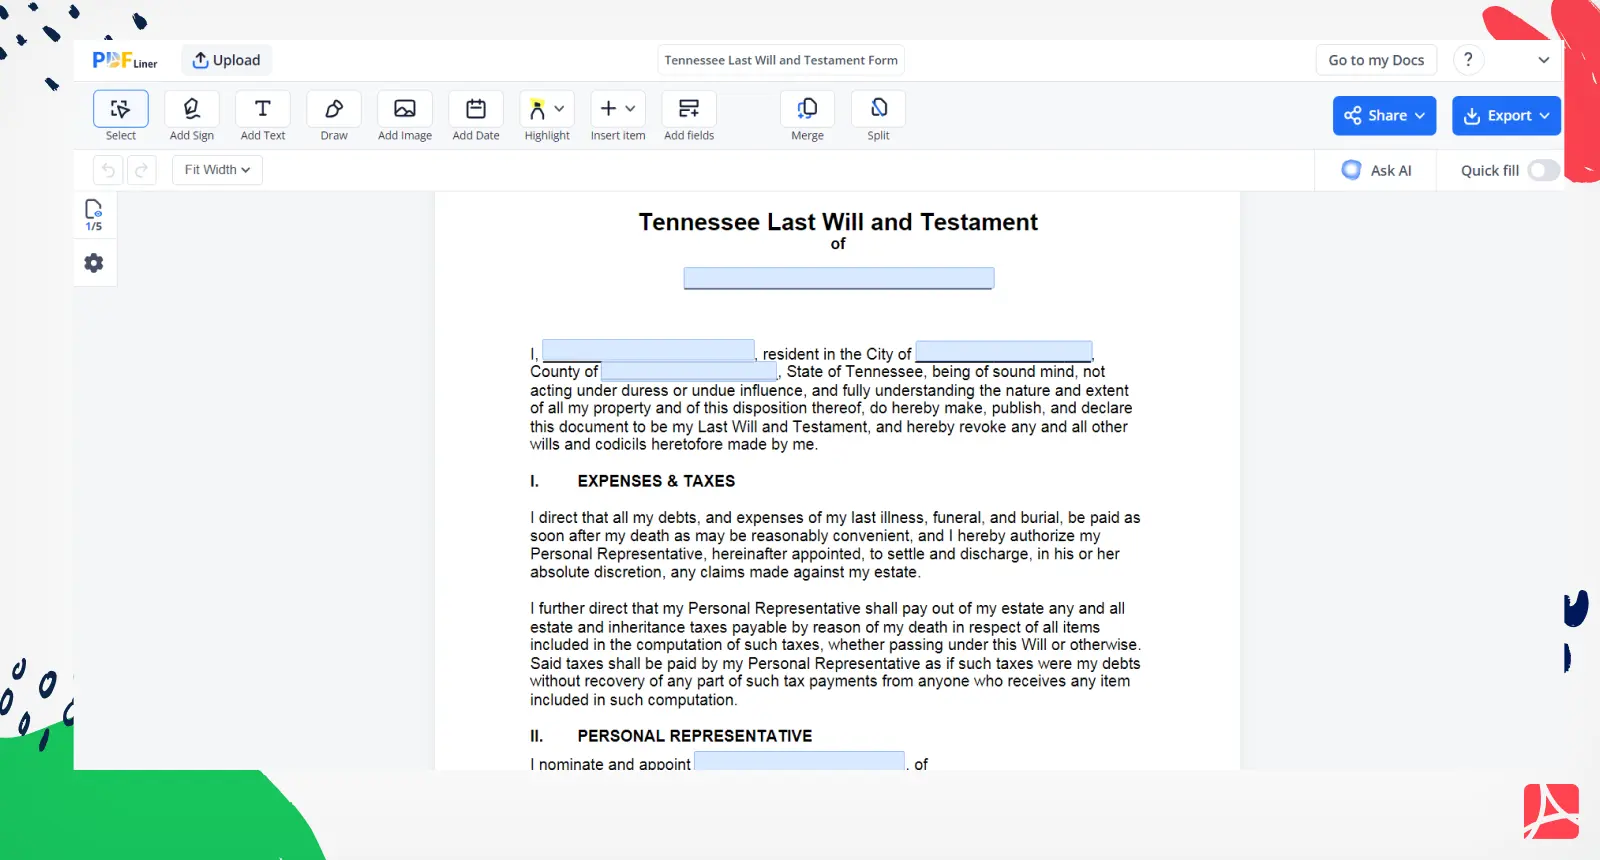 Tennessee Last Will and Testament Form Screenshot